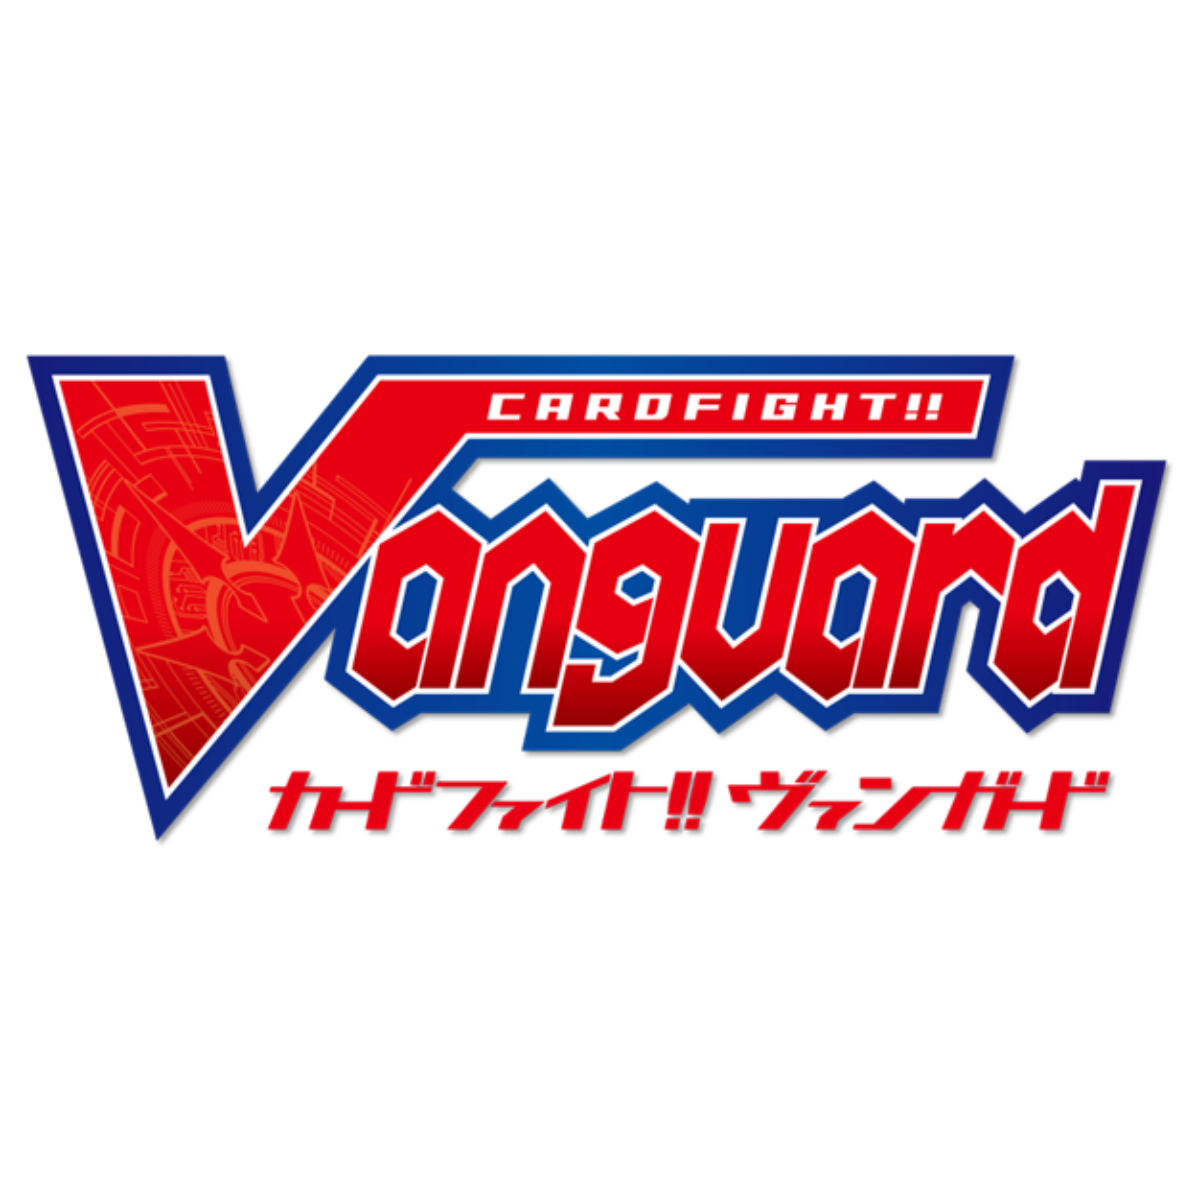 Bushiroad Sleeves Collection -Card Fight!! Vanguard- &quot;Absolute Zero Sagitta&quot; (Vol.727)-Bushiroad-Ace Cards &amp; Collectibles